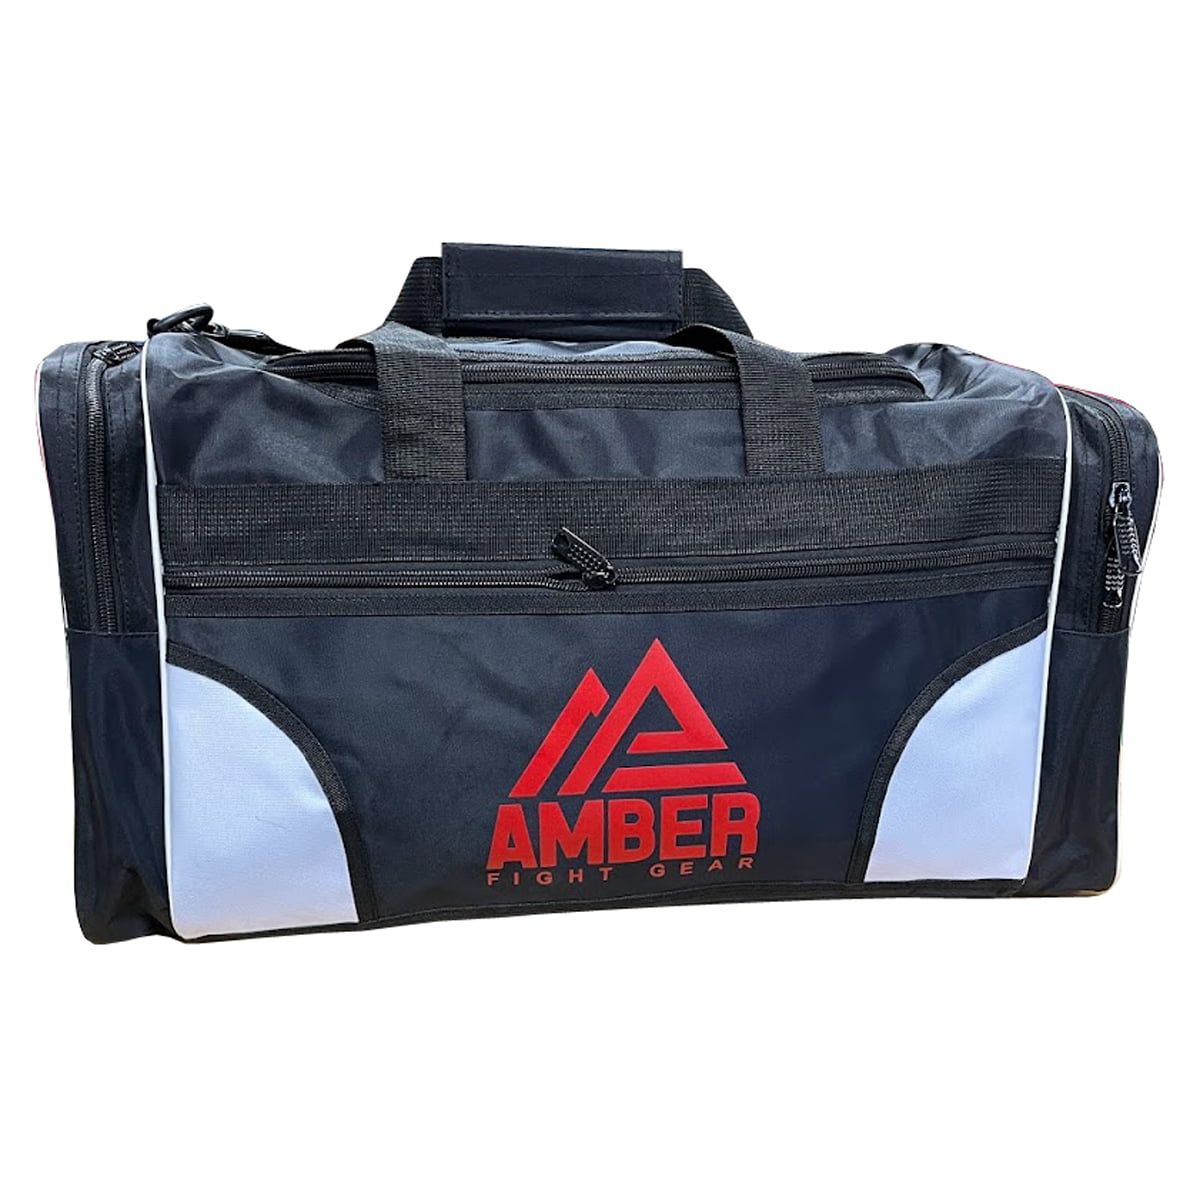 Swimmers Active Athletes No Details about   Longevity Gear Mesh Bag Duffle Boxing Gym MMA BJJ 